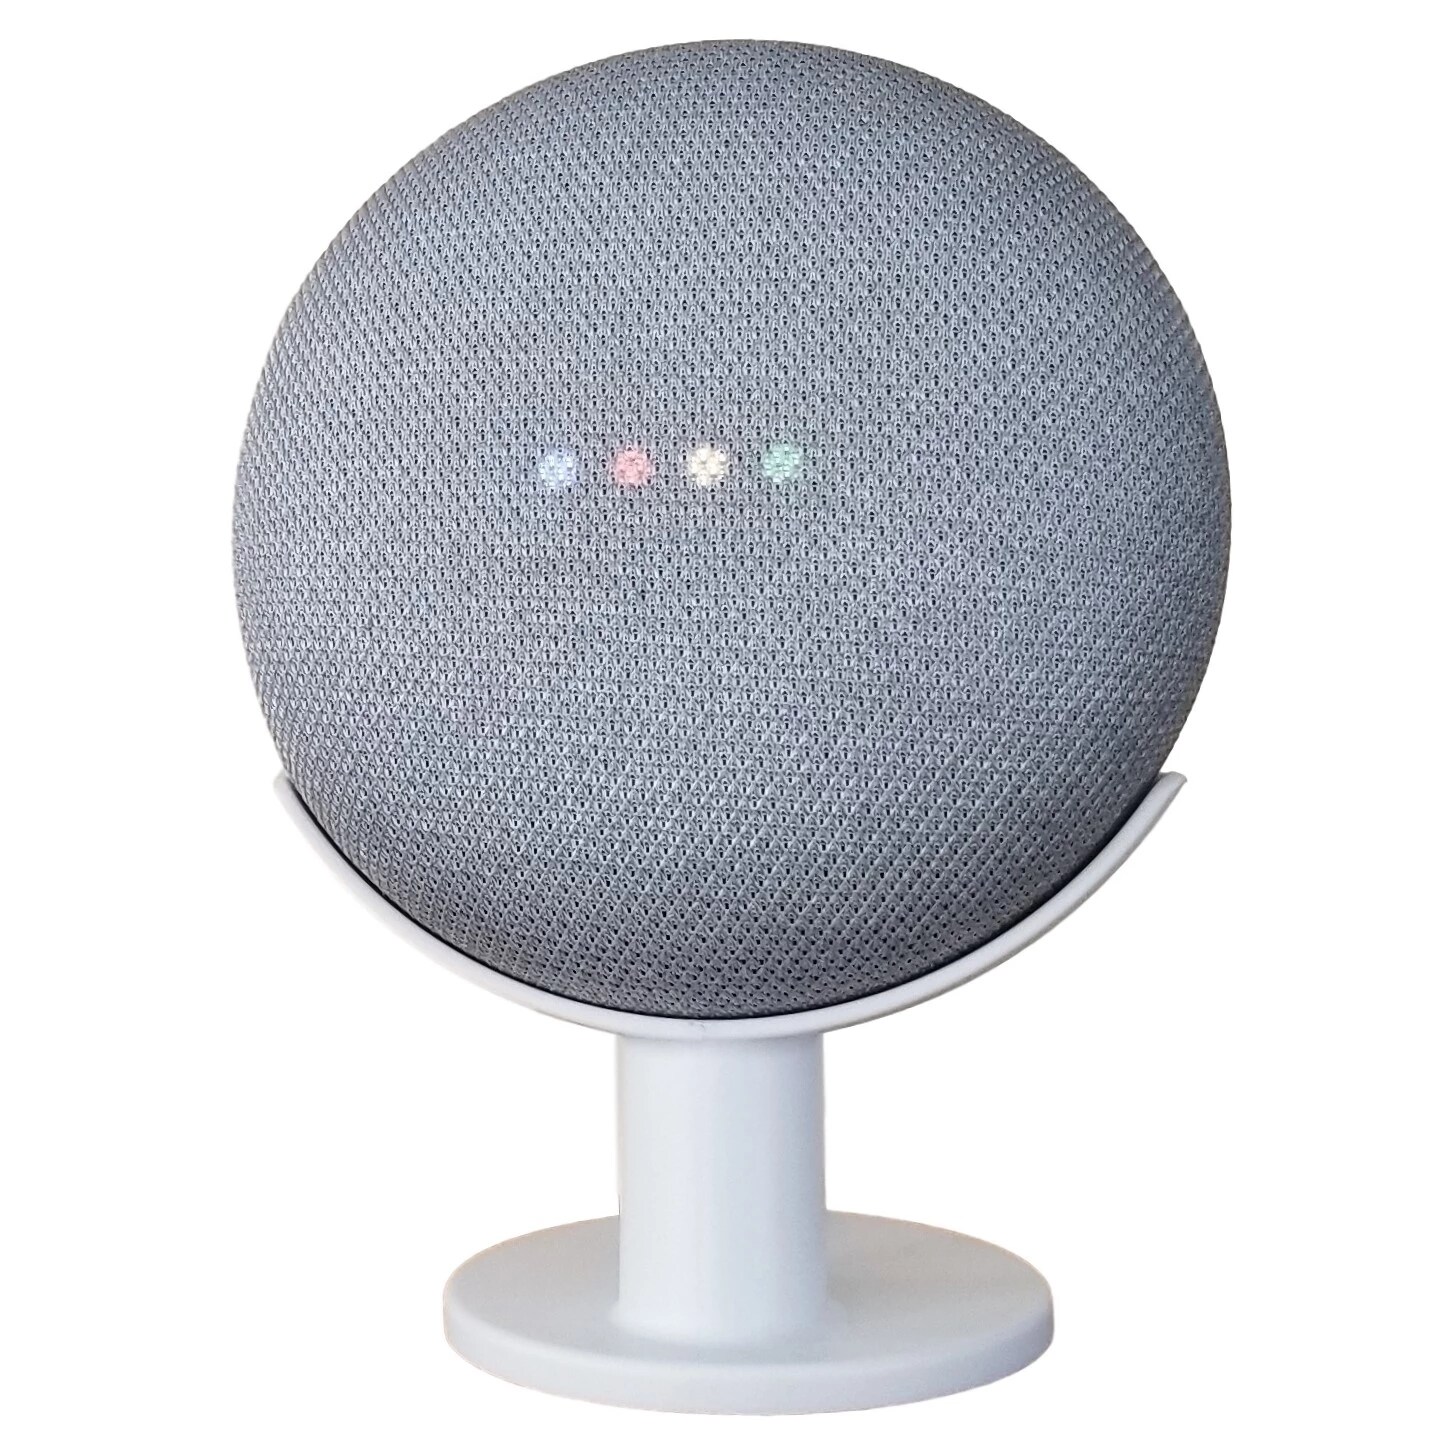 Sound Visibility and Appearance Improving Black Metal Desktop Mount for Your Google Home Mini Voice Assistant Caremoo Pedestal Stand for Google Home Mini 